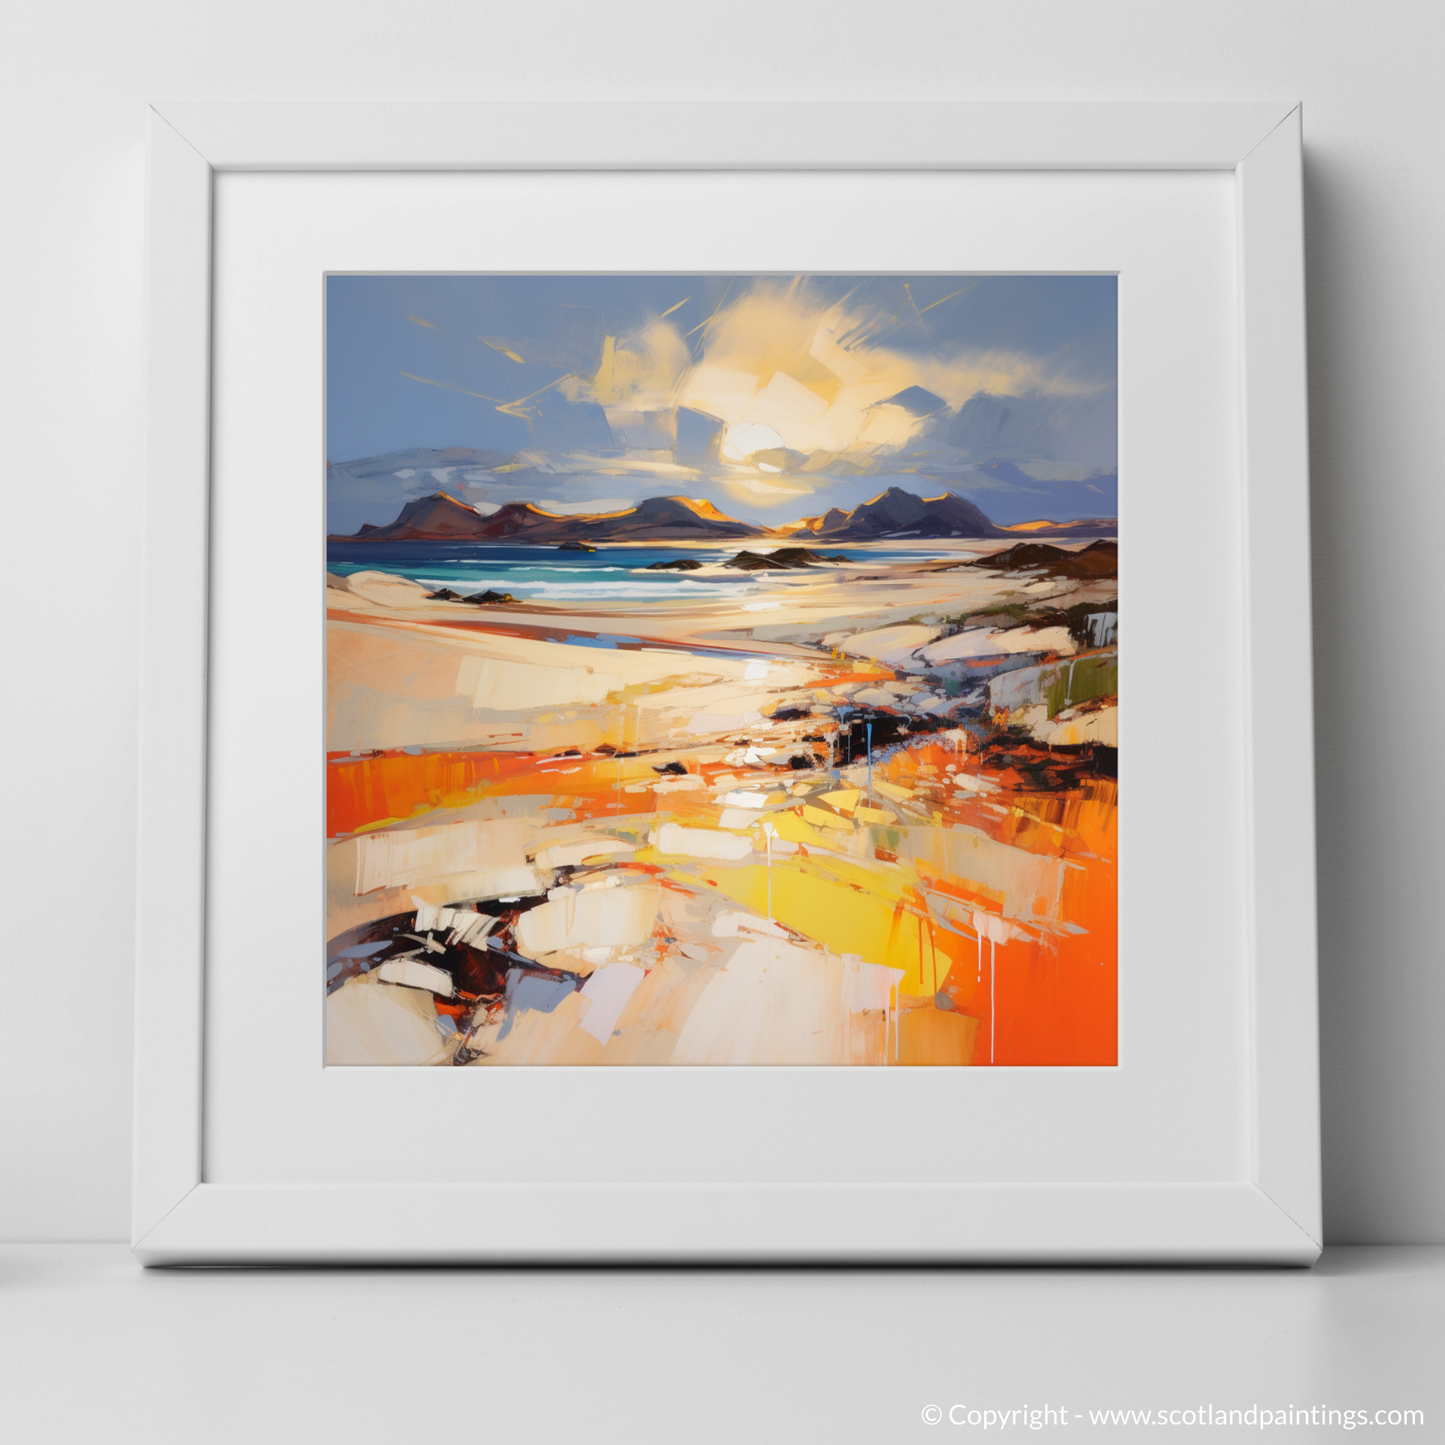 Art Print of Mellon Udrigle Beach at golden hour with a white frame